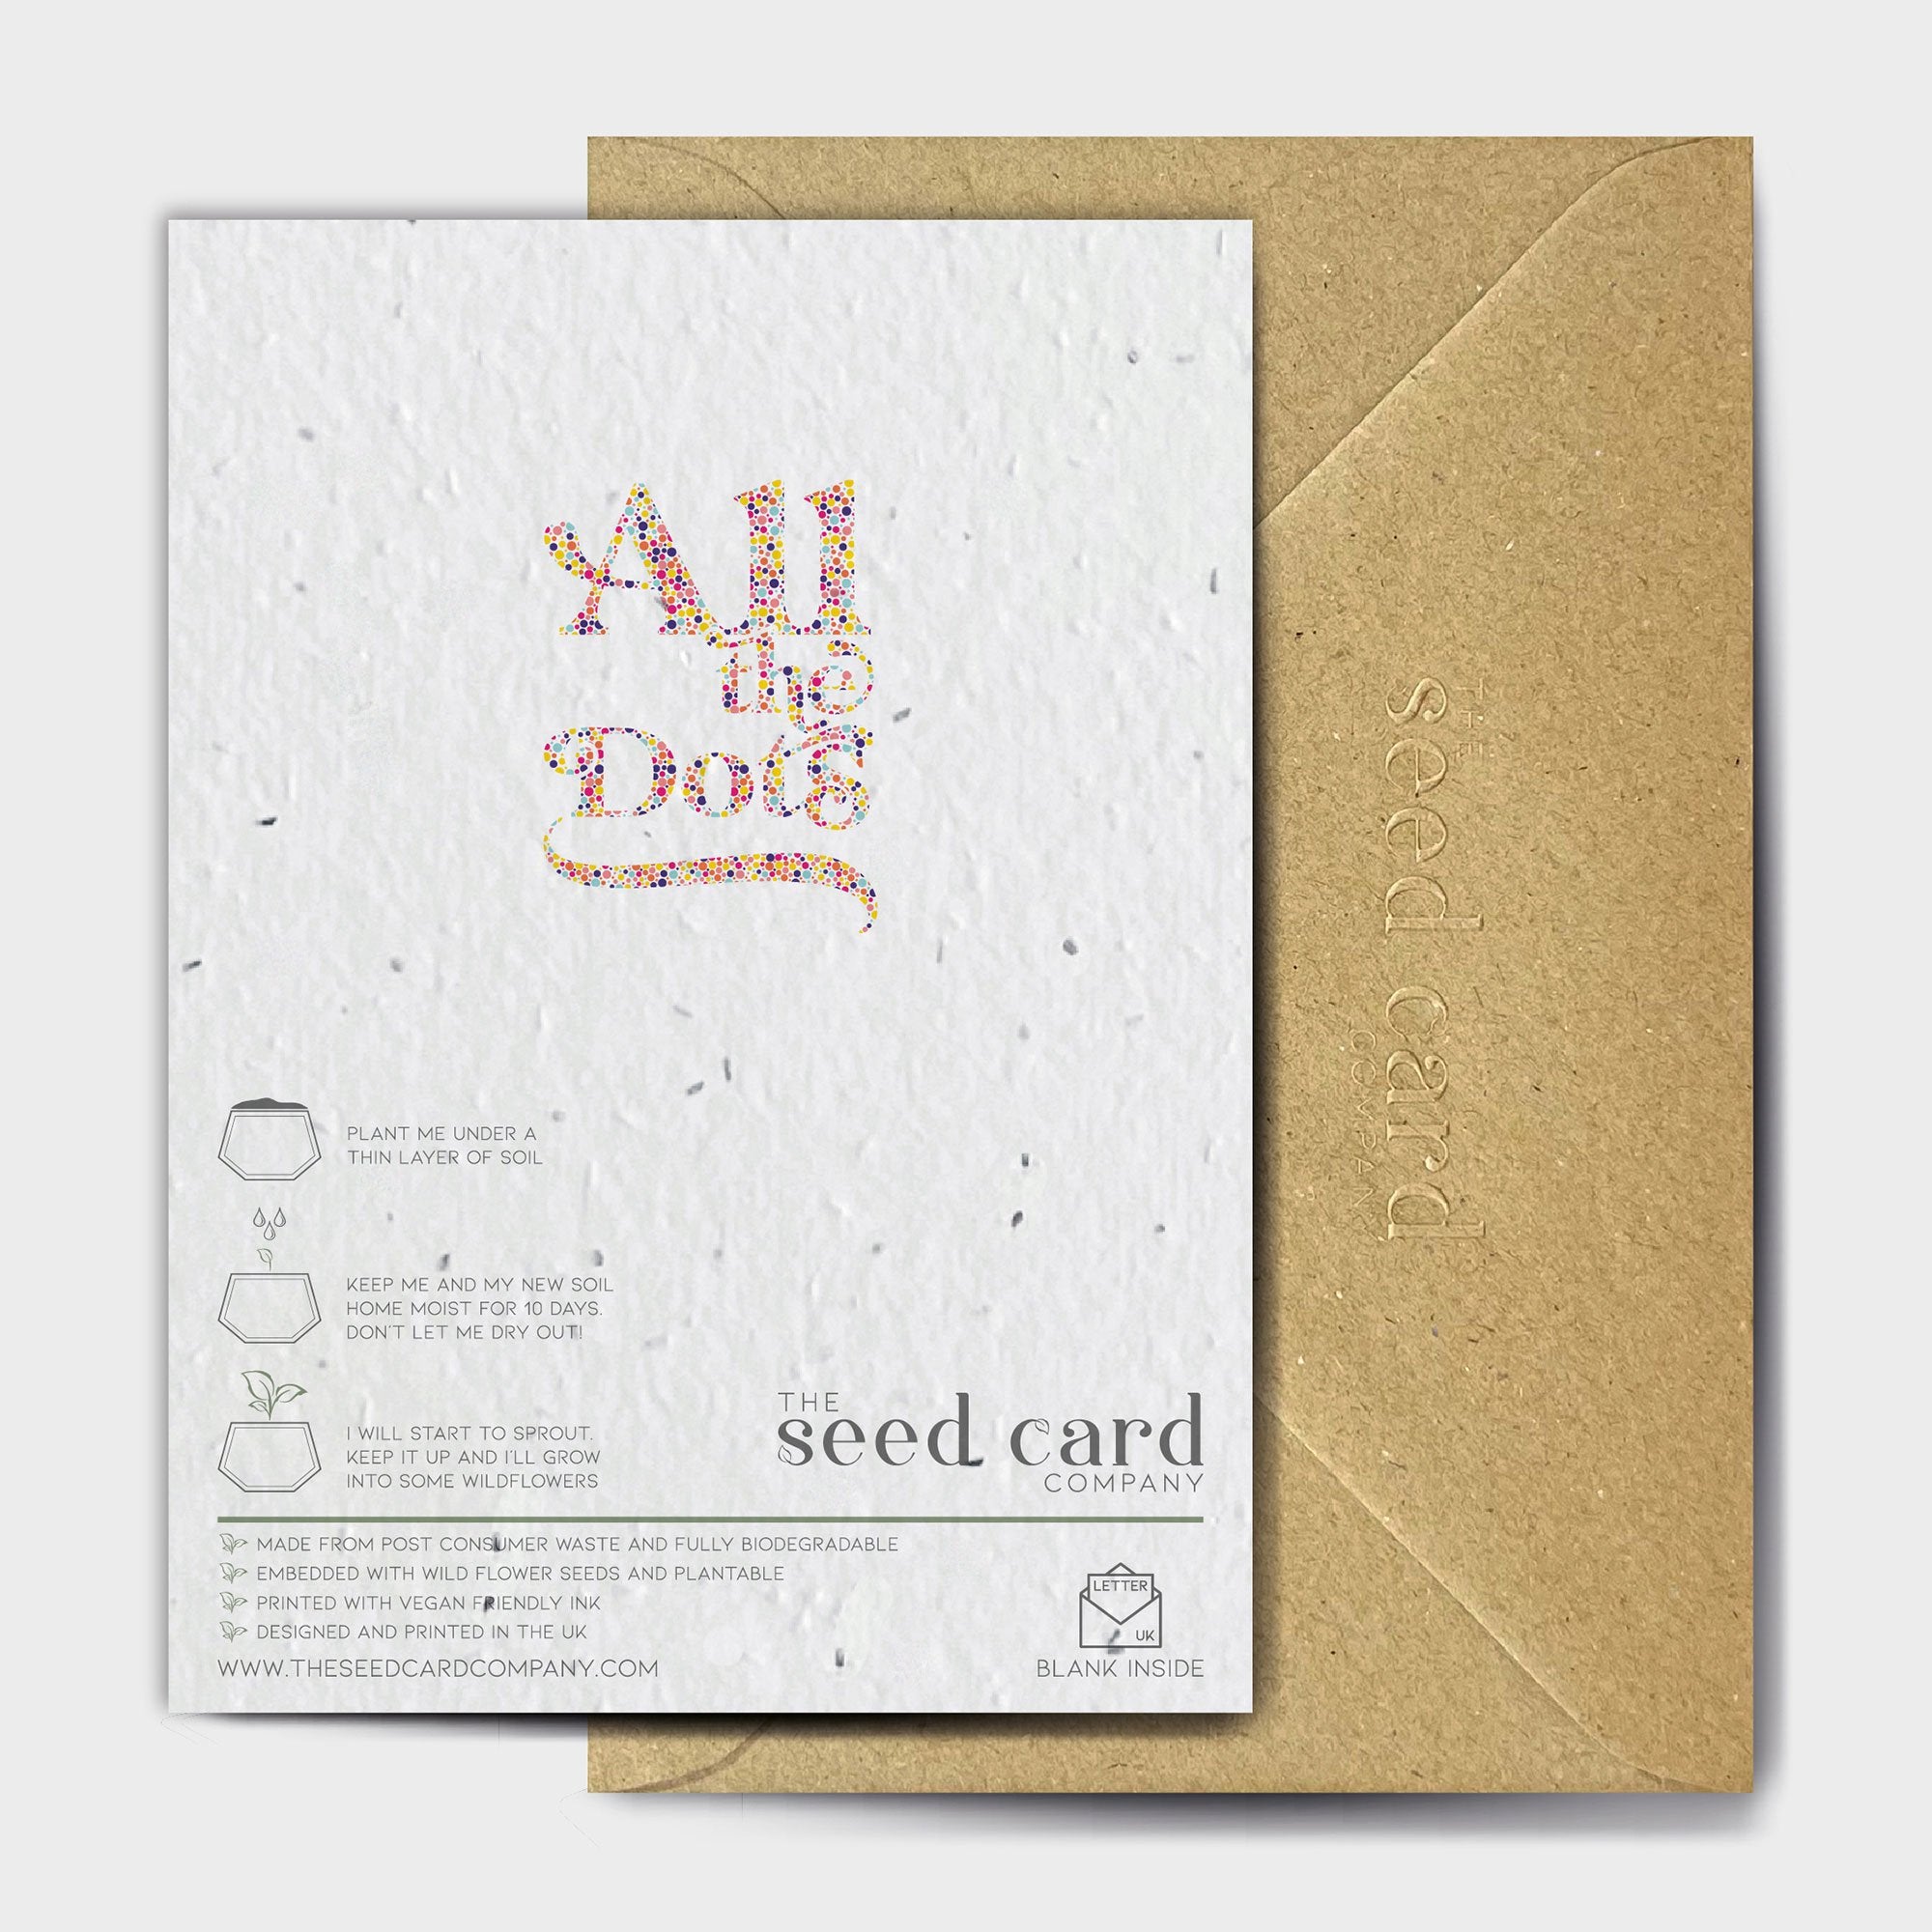 Shop online You Dot This - 100% biodegradable seed-embedded cards Shop -The Seed Card Company